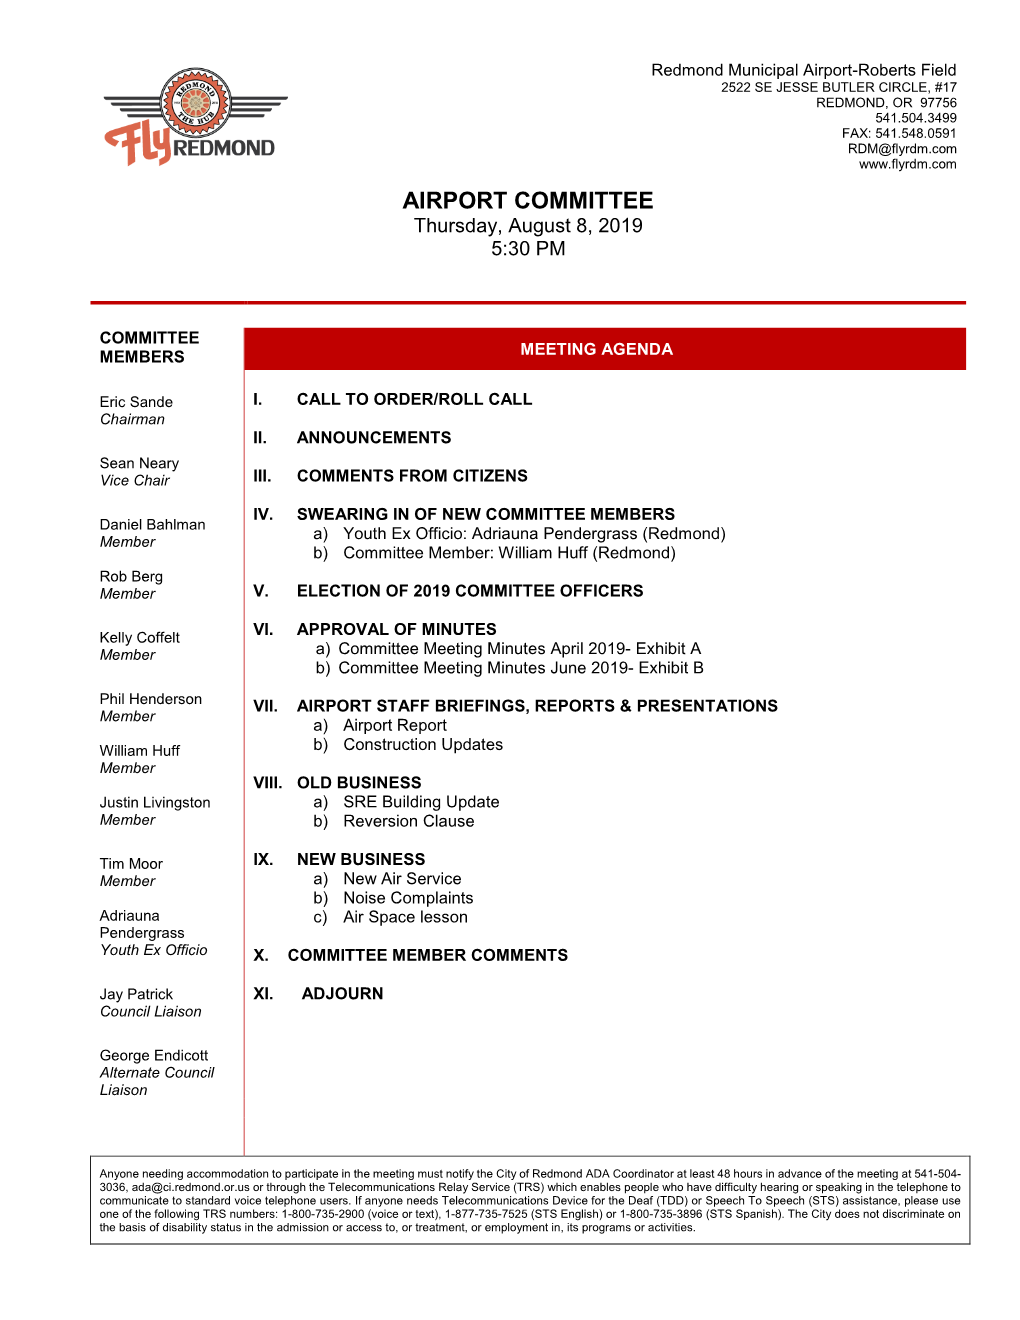 AIRPORT COMMITTEE Thursday, August 8, 2019 5:30 PM